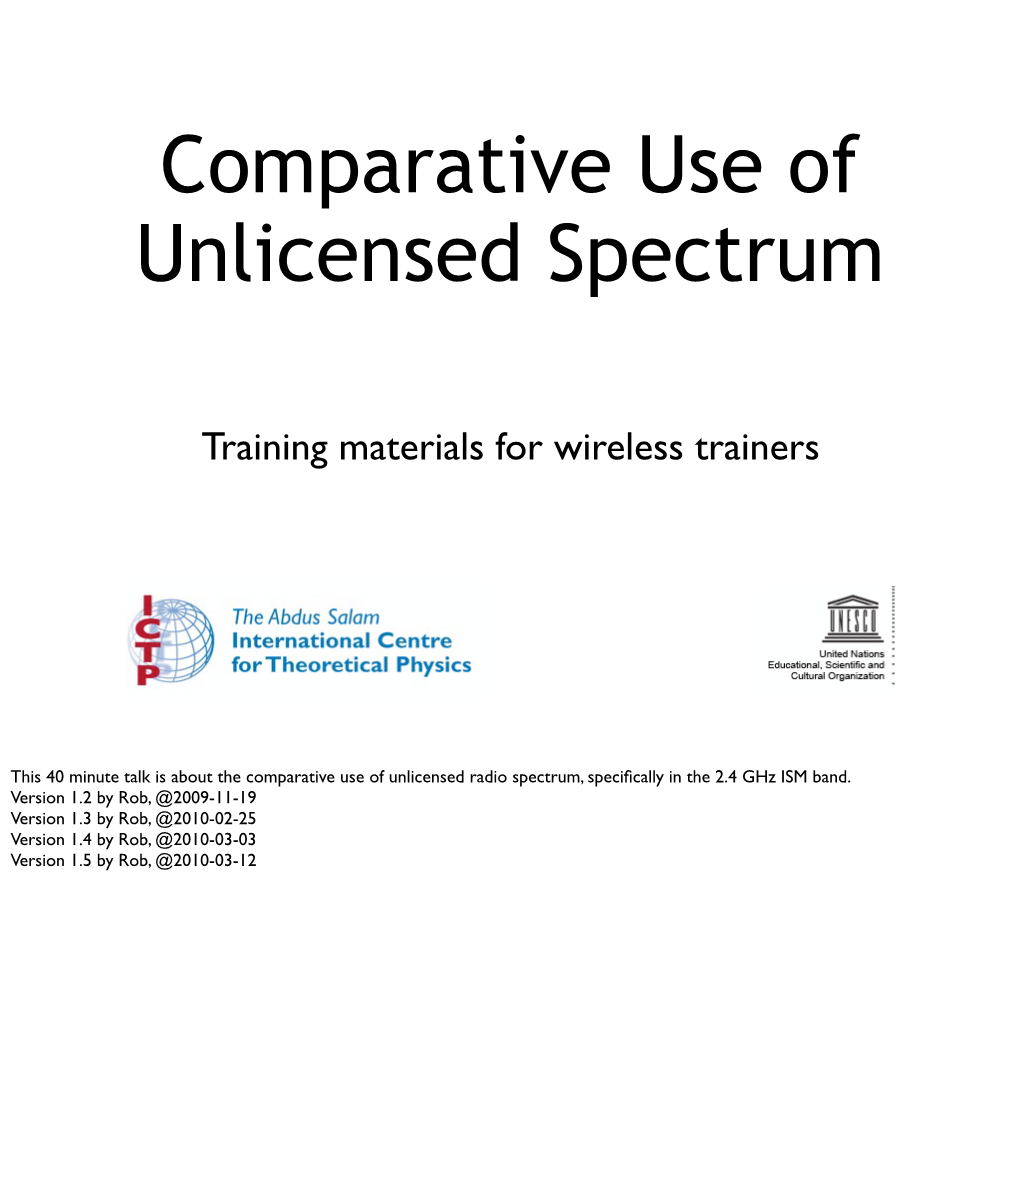 Training Materials for Wireless Trainers